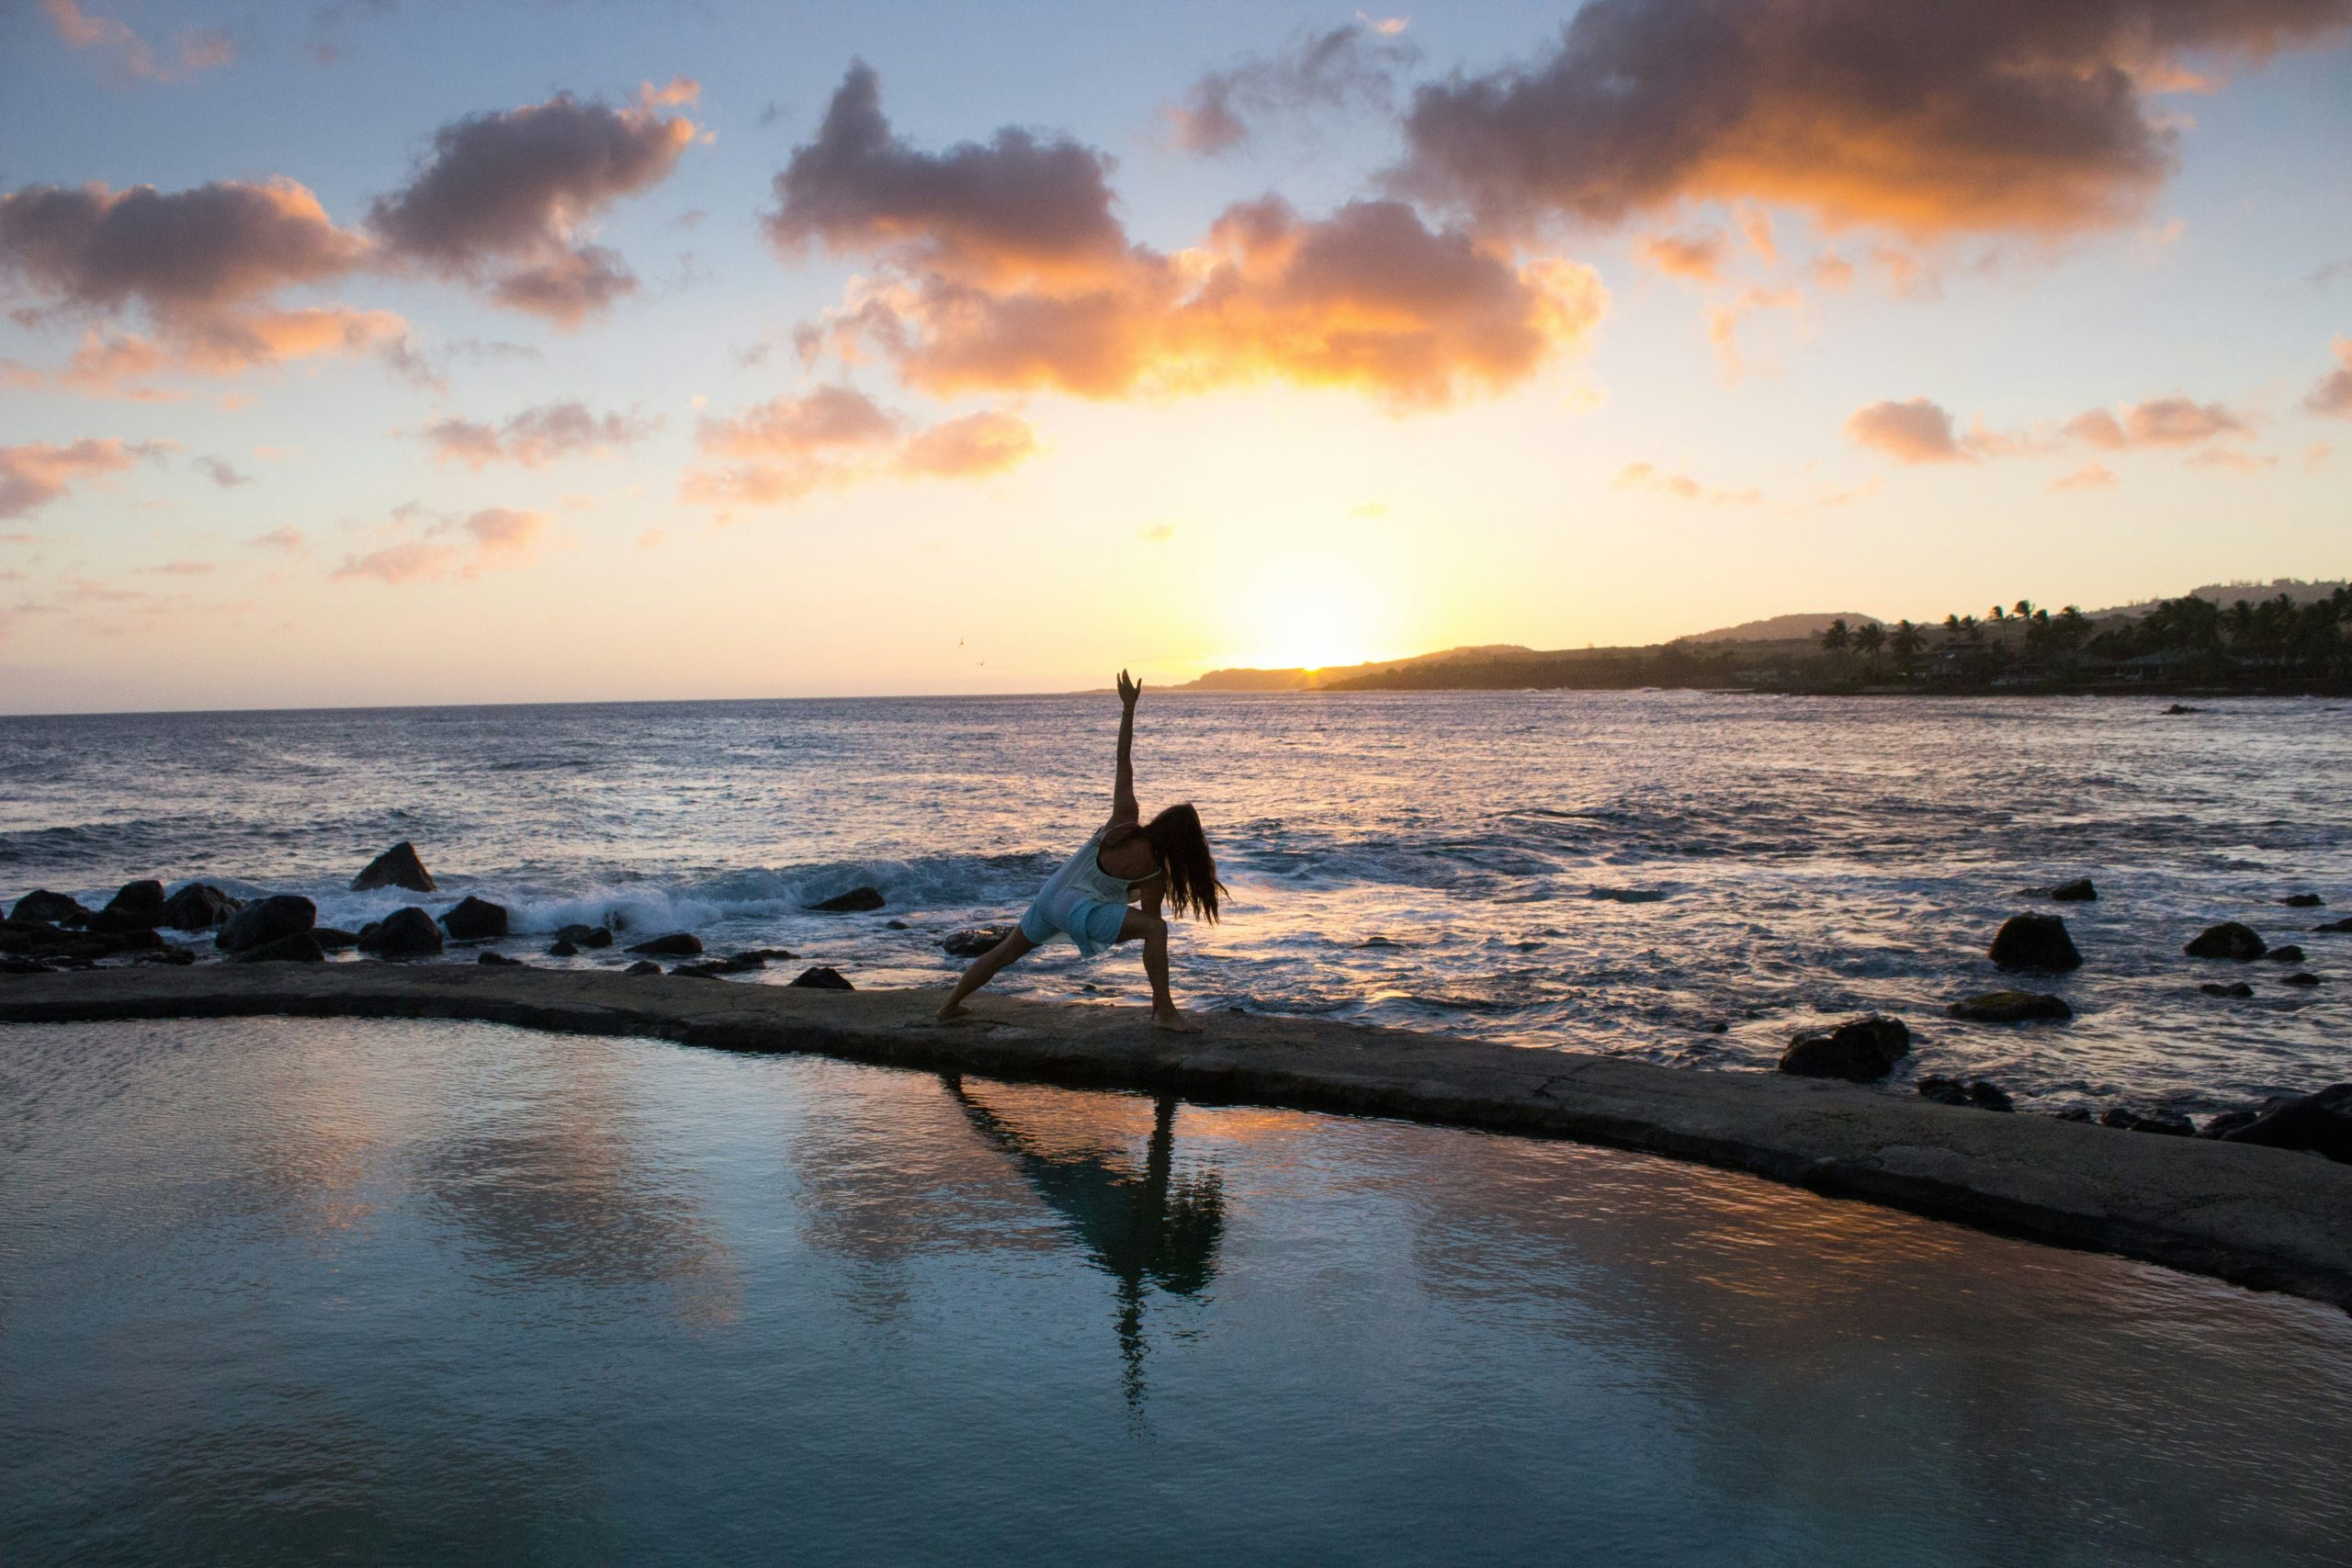 discover a selection of peaceful retreats to escape the hustle and bustle of everyday life. plan your next spiritual or wellness retreat and reconnect with nature.